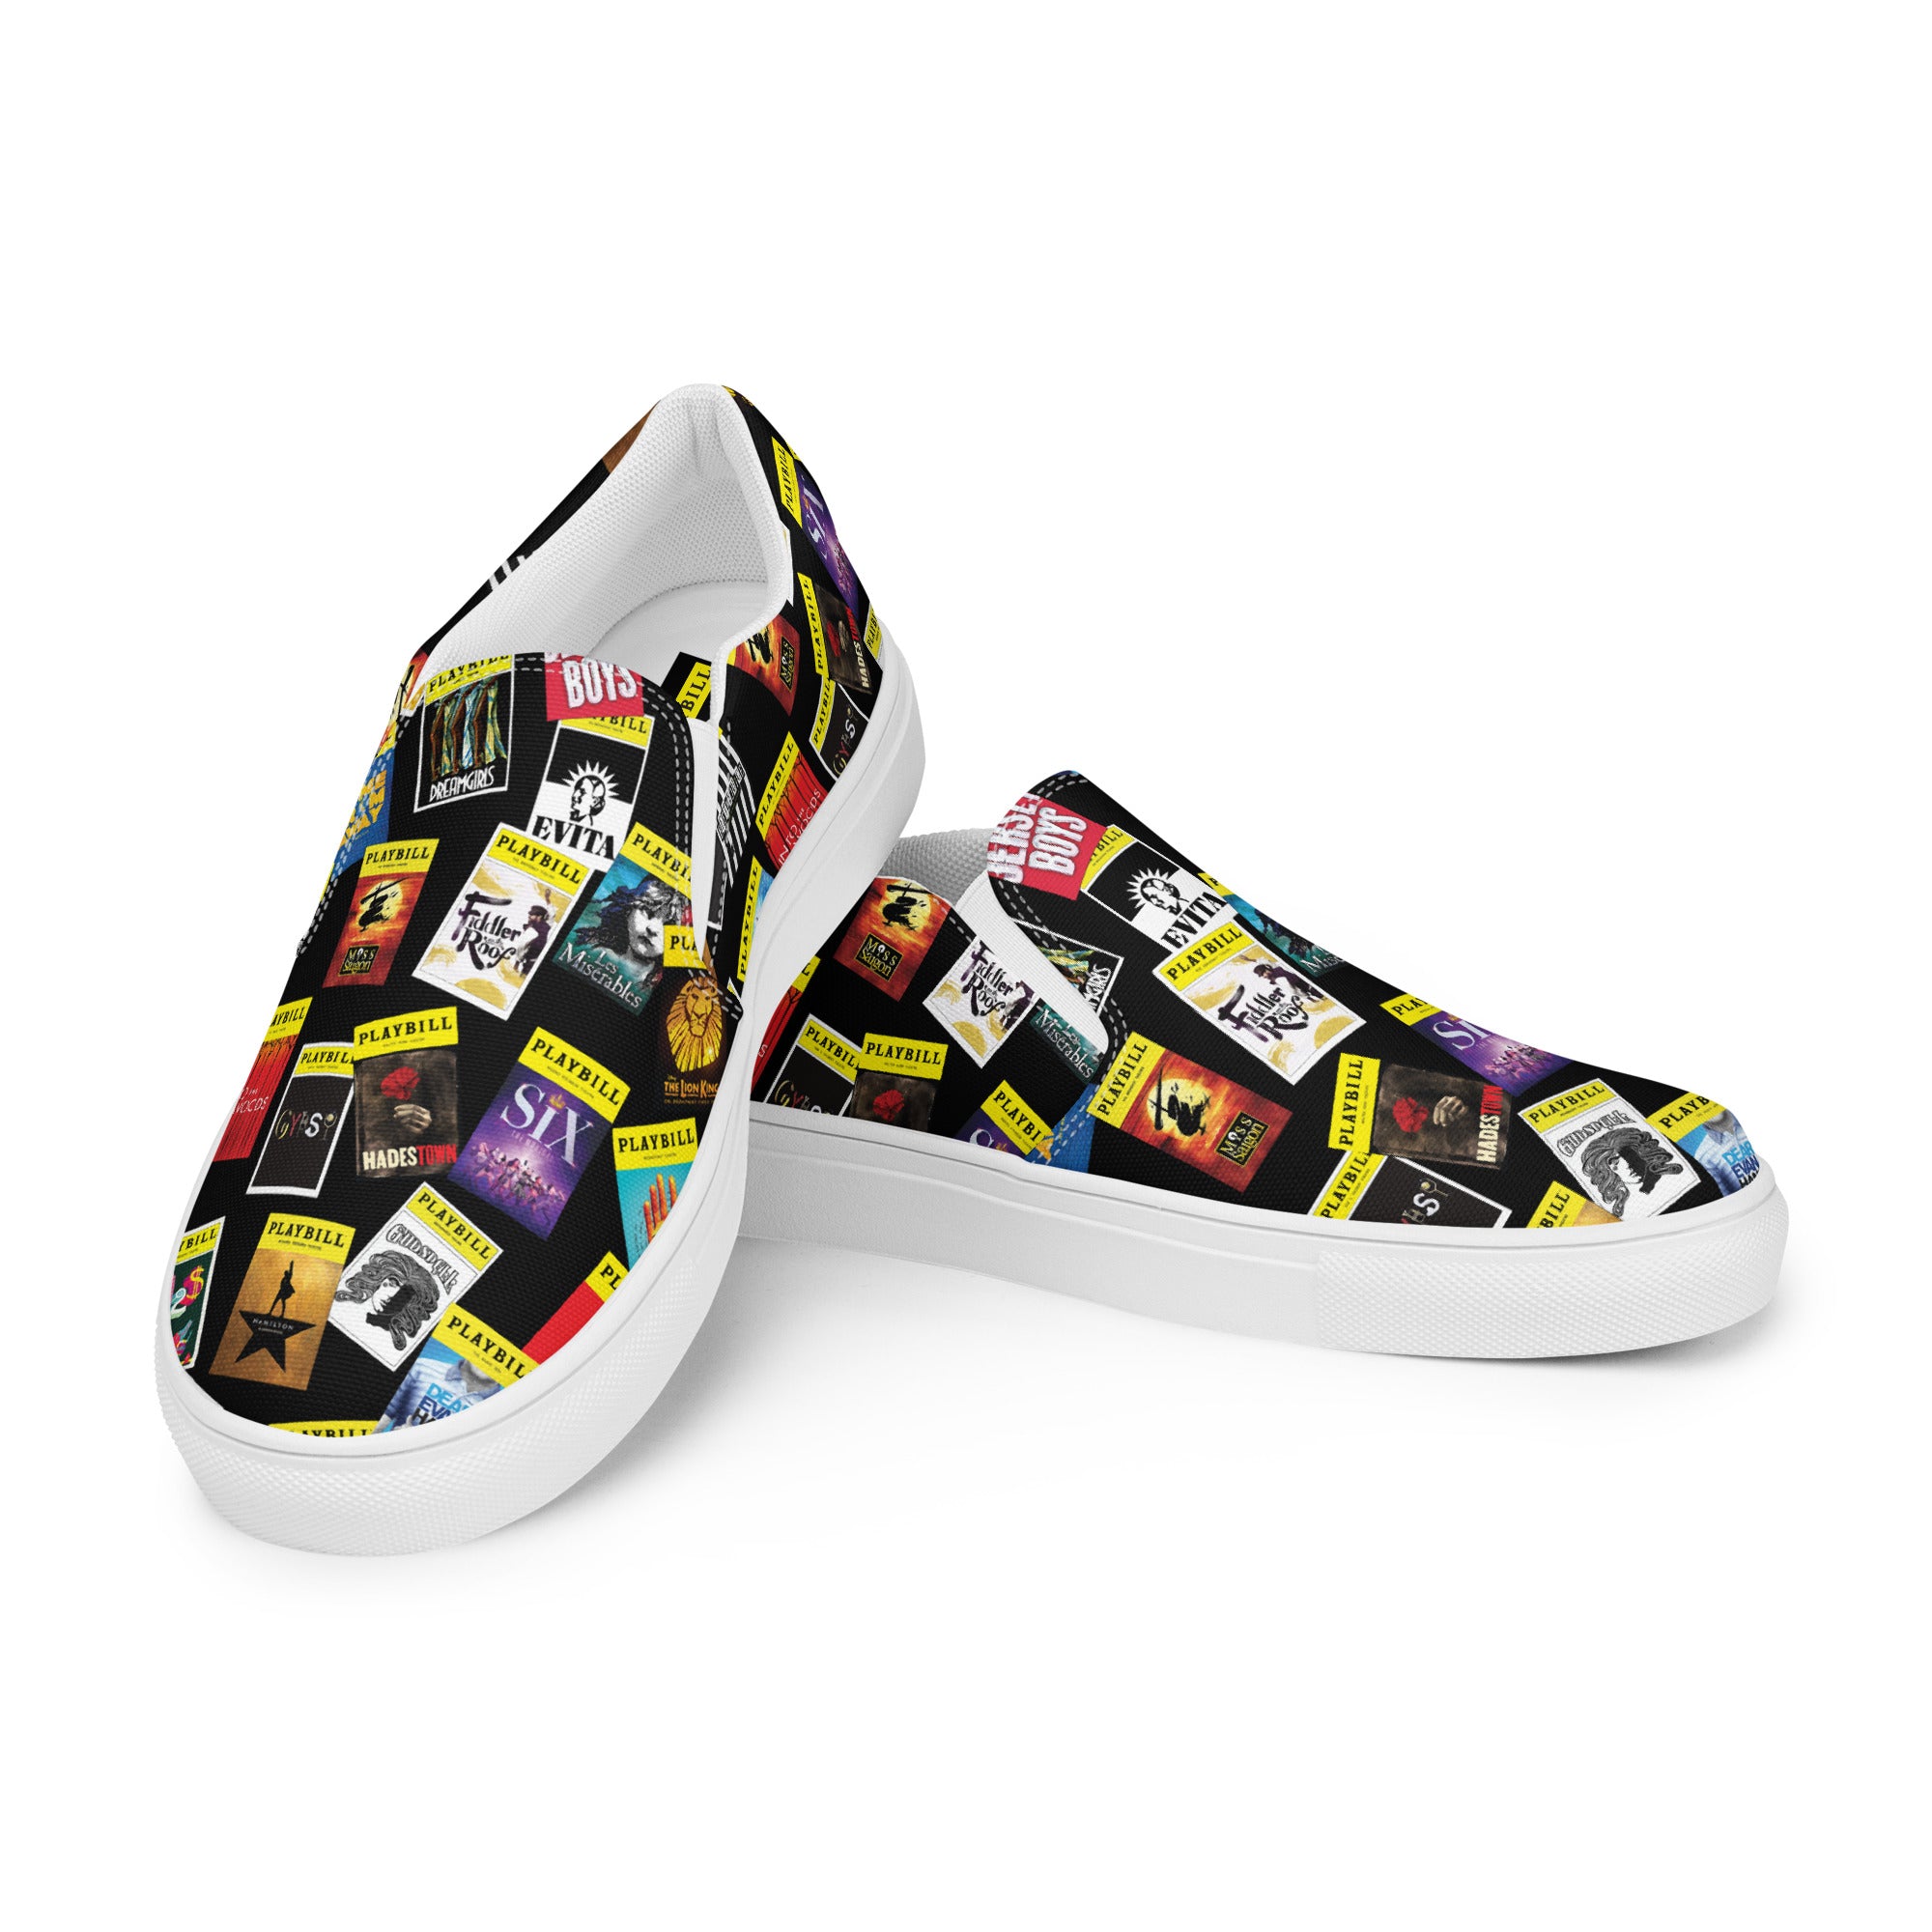 PLAYBILL Covers - Women’s Slip-On Canvas Shoes in Black